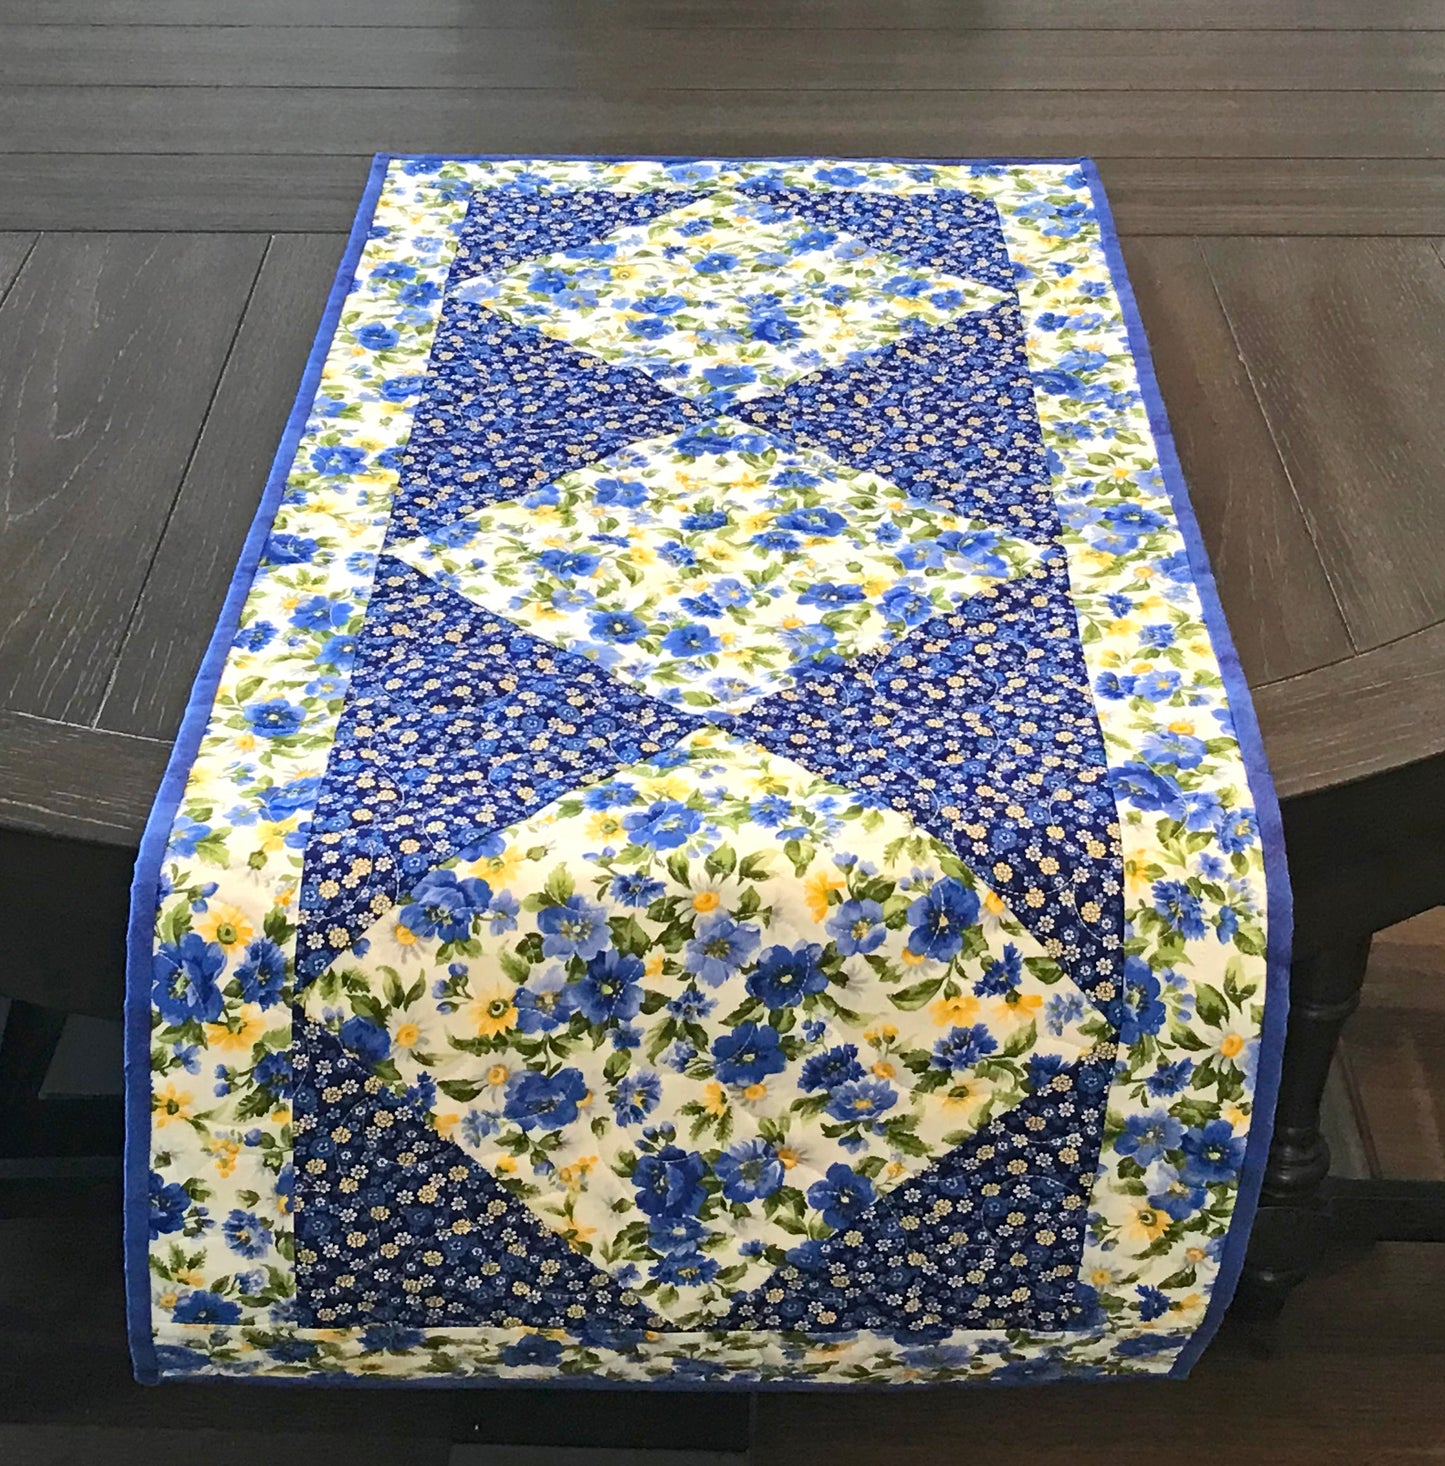 Blue and yellow floral table runner with a center diamond pattern displayed on a table